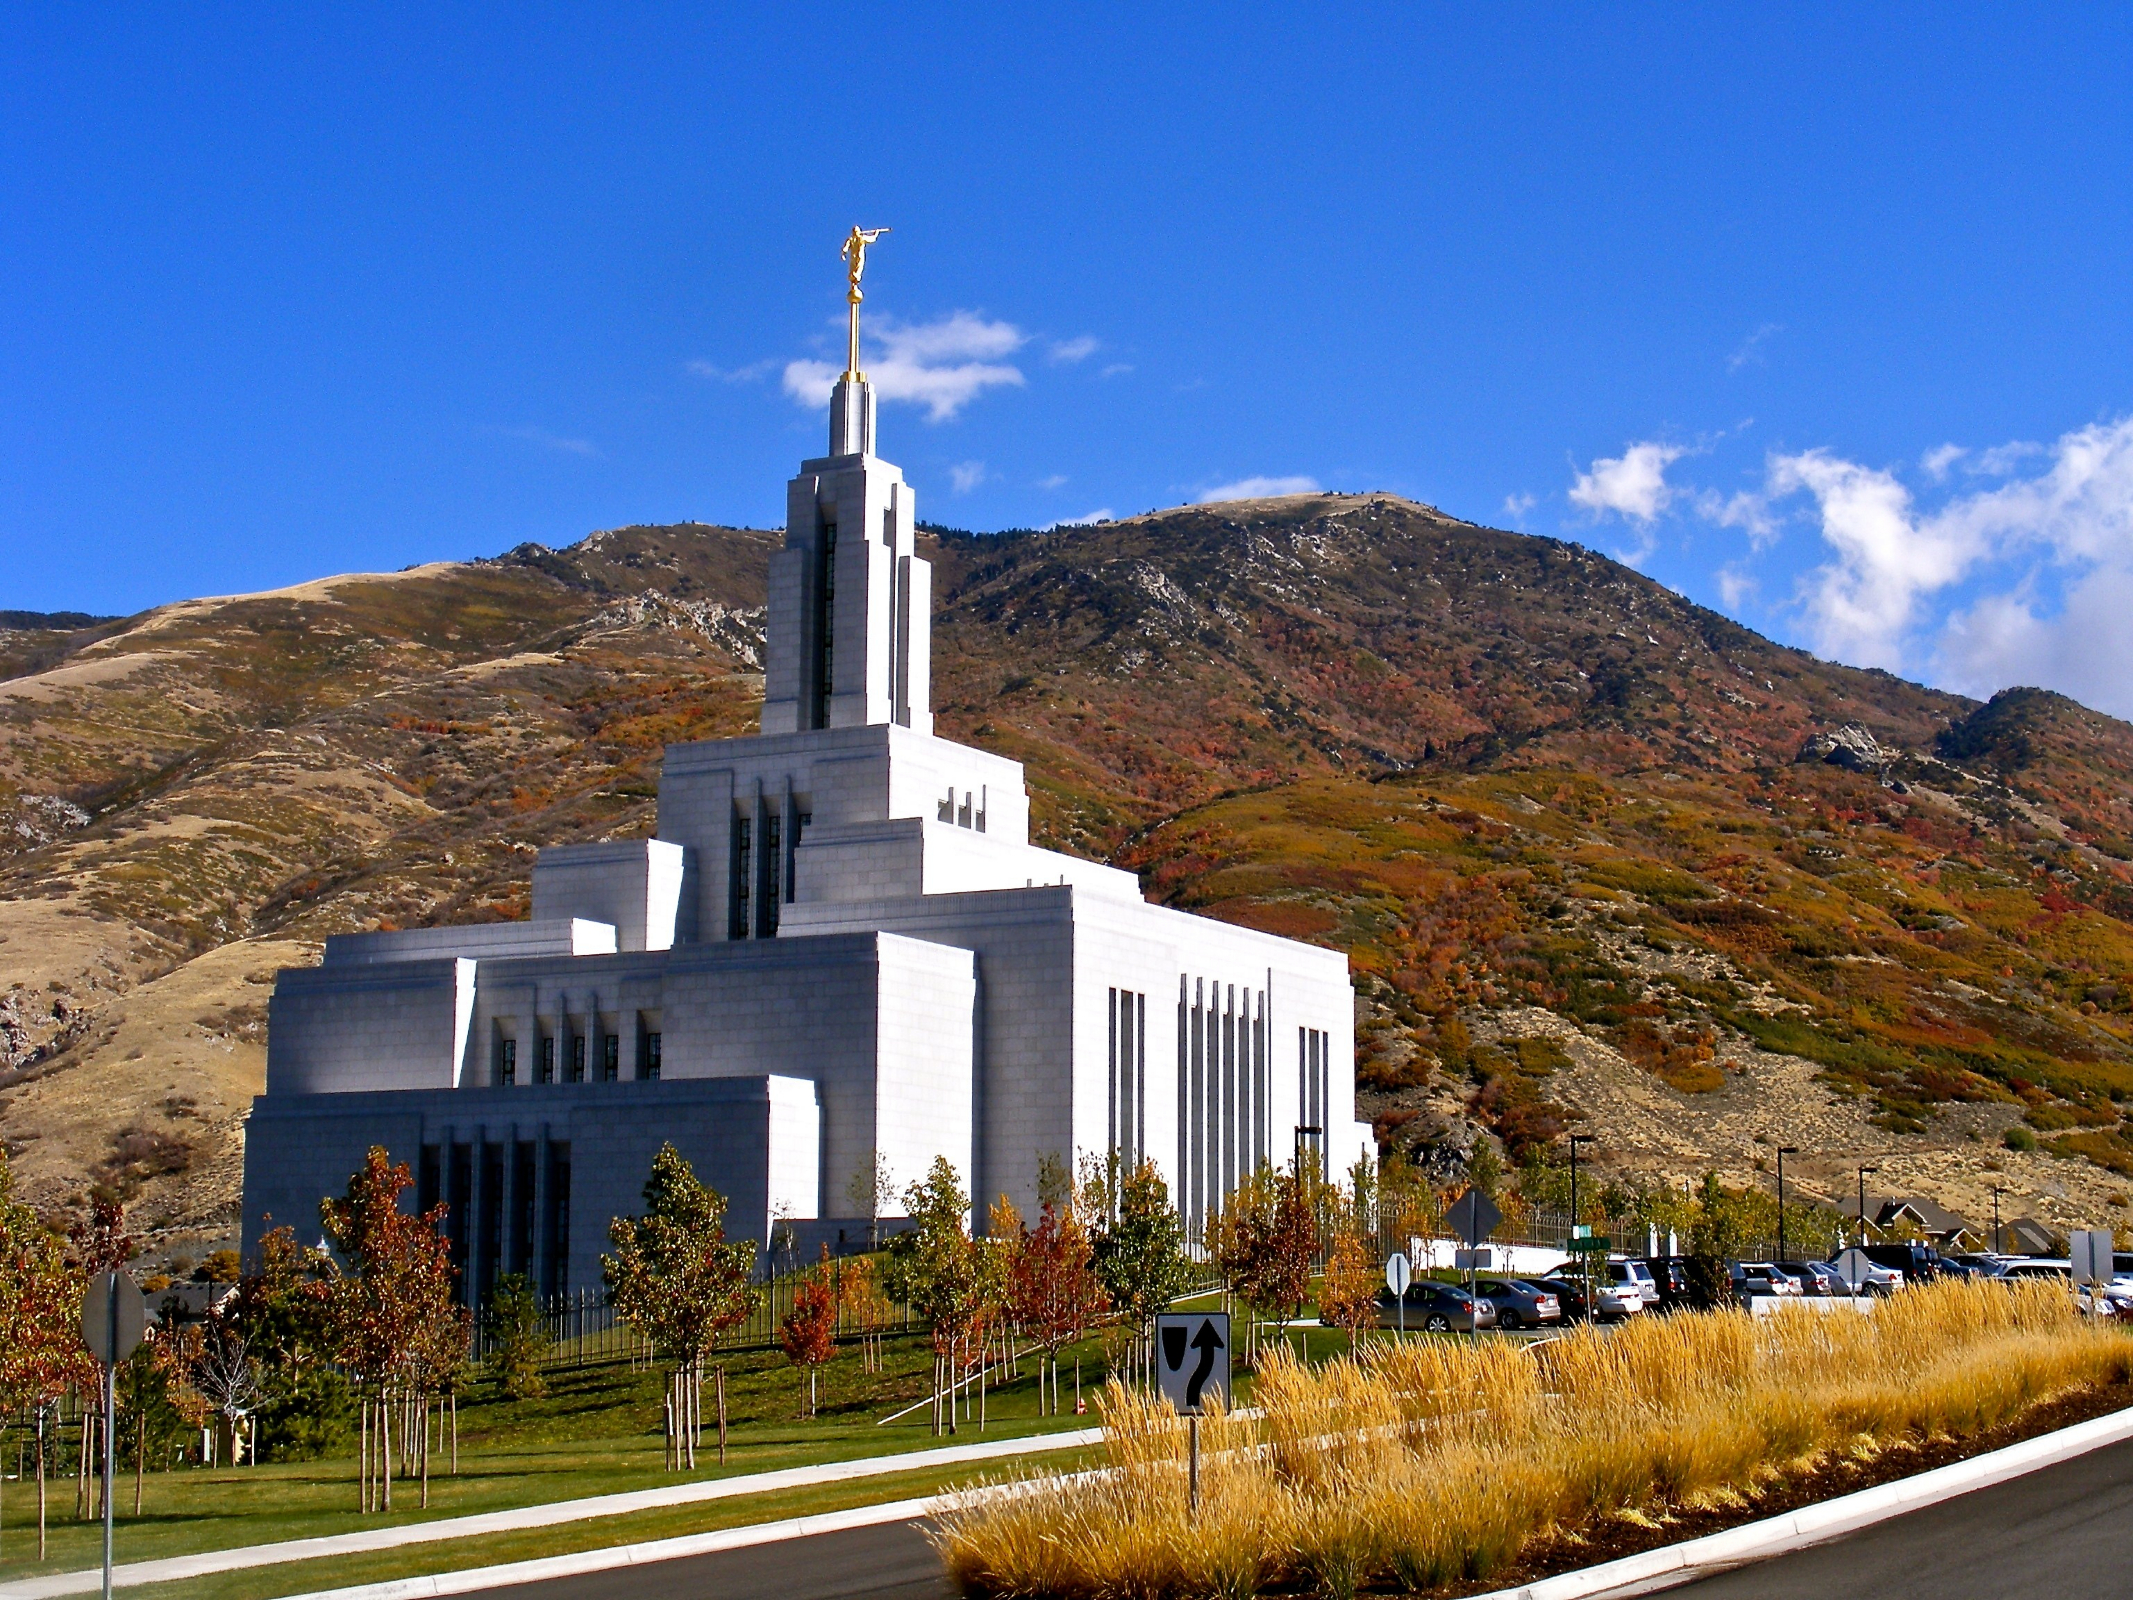 The Draper Utah Temple and Grounds